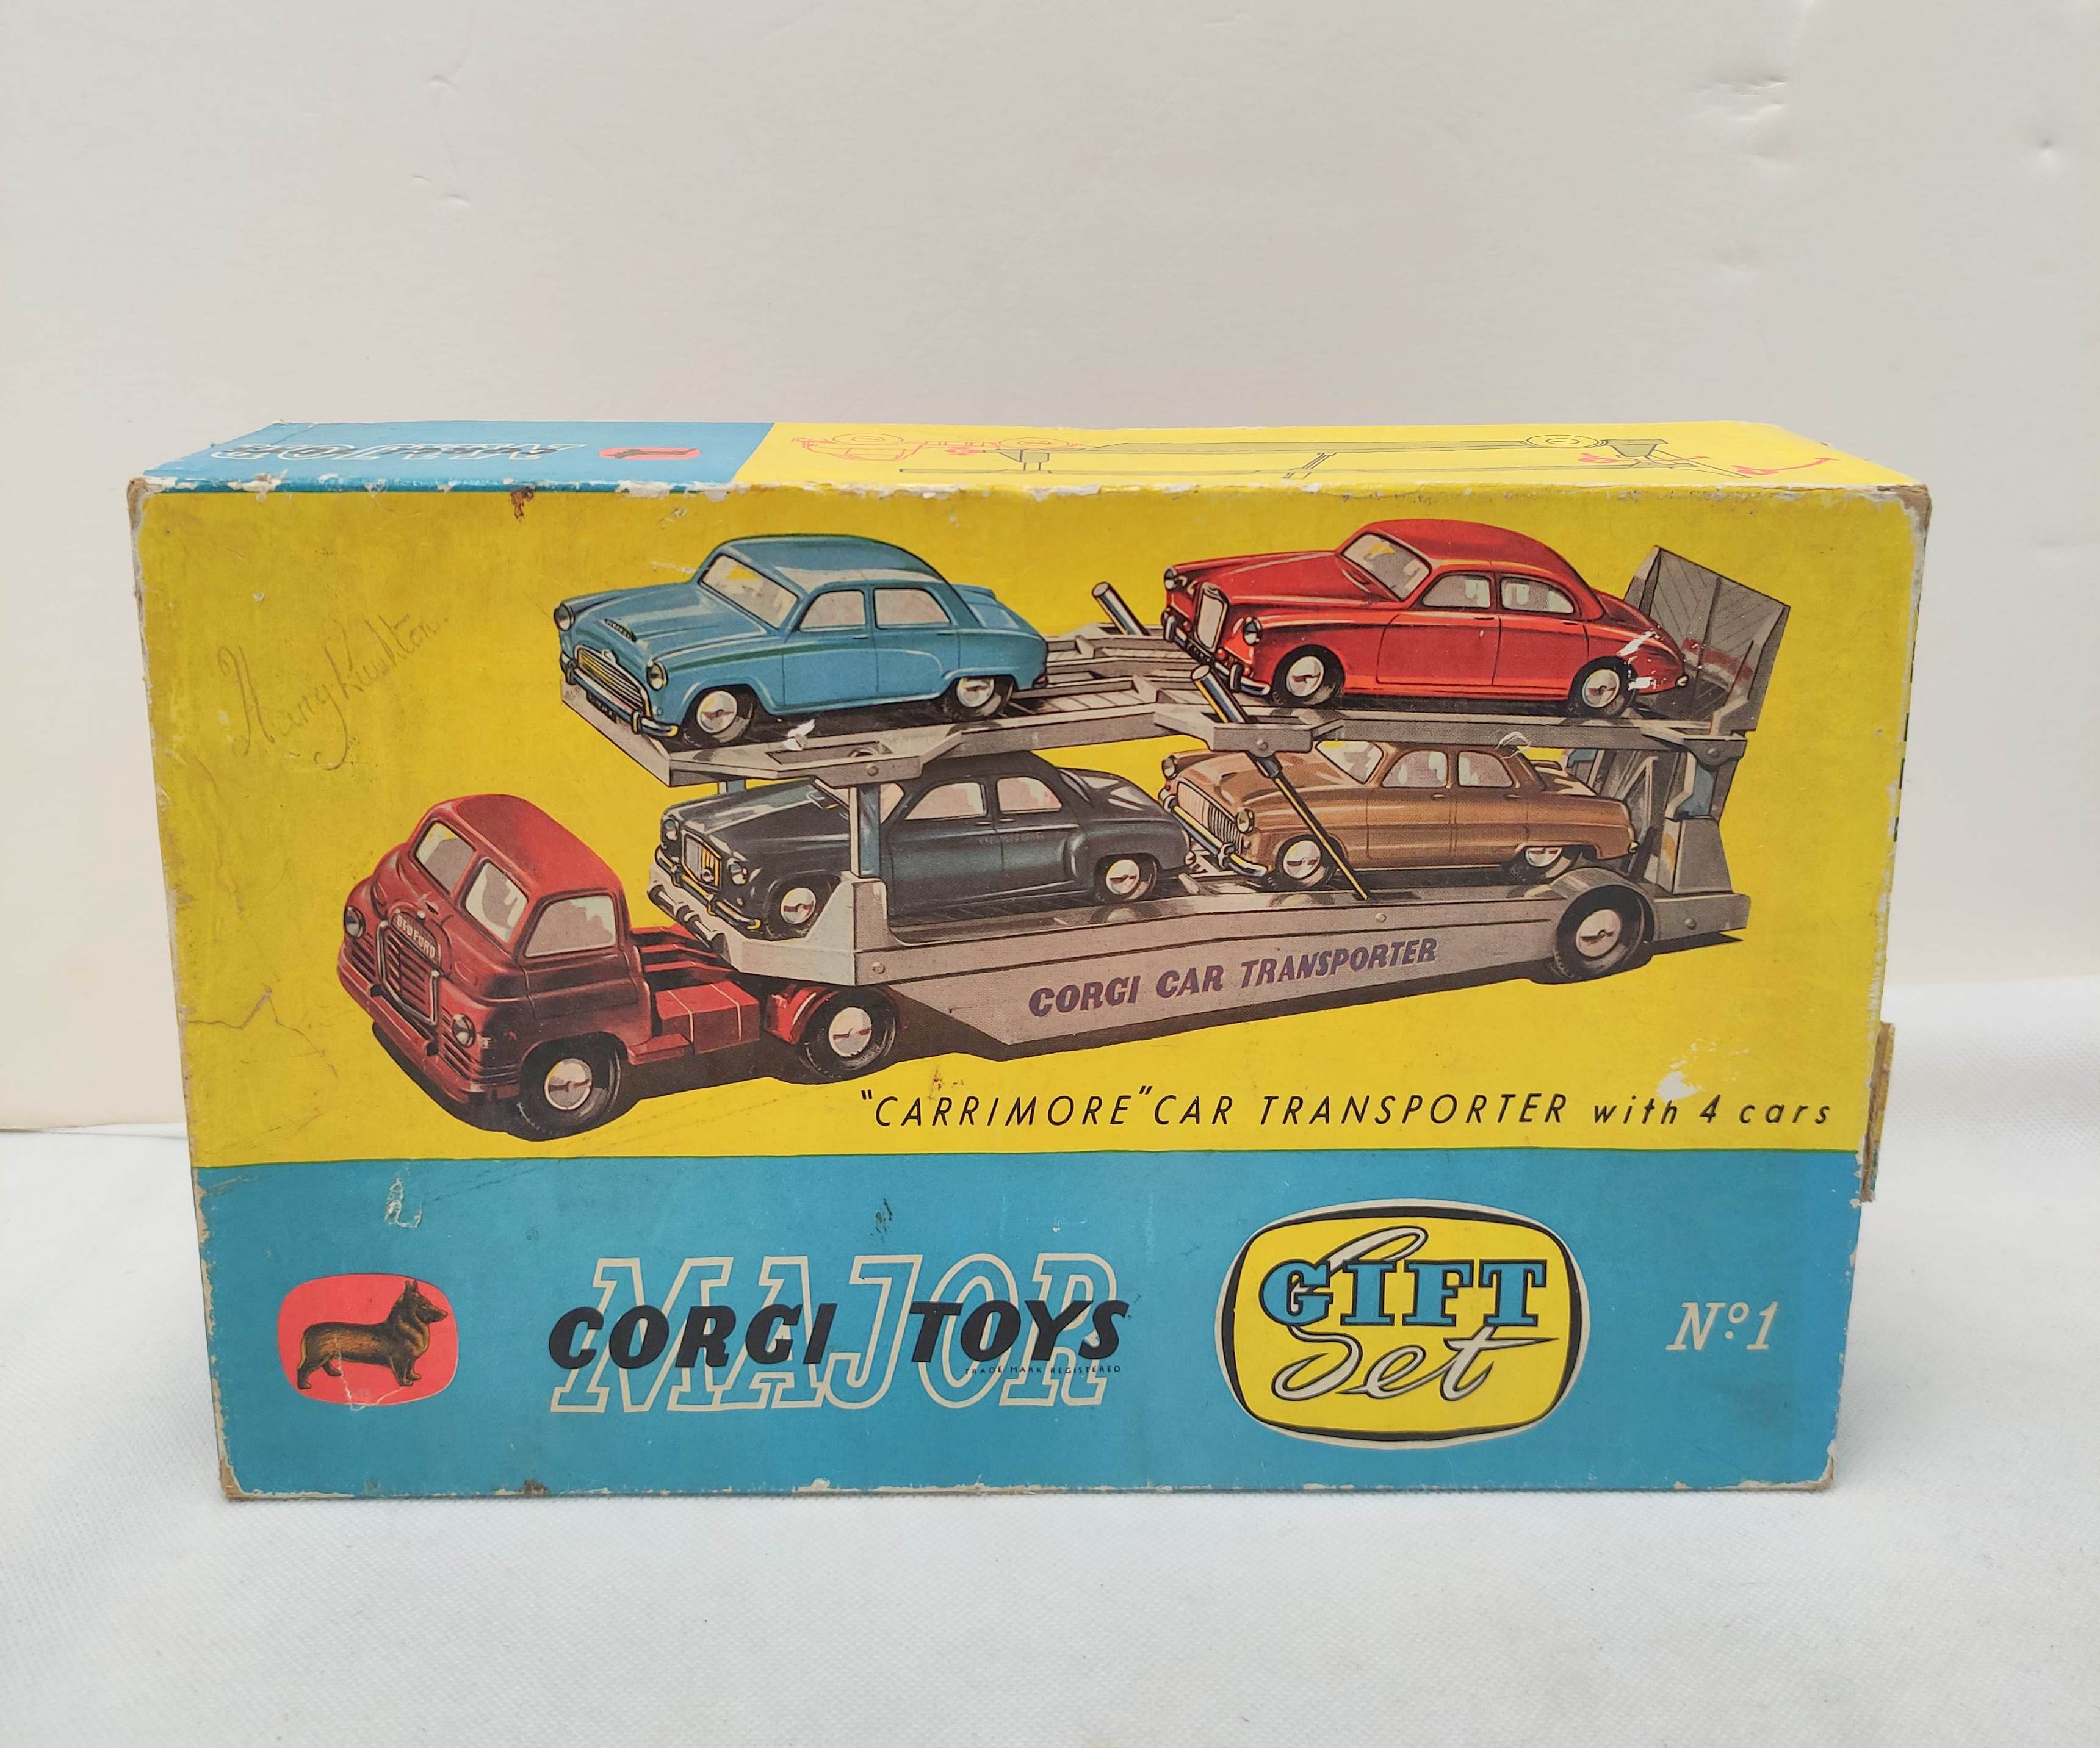 Corgi Major Toys Gift Set No.1 Carrimore Car Transporter with four Boxed Cars, consists of: Car - Image 2 of 12